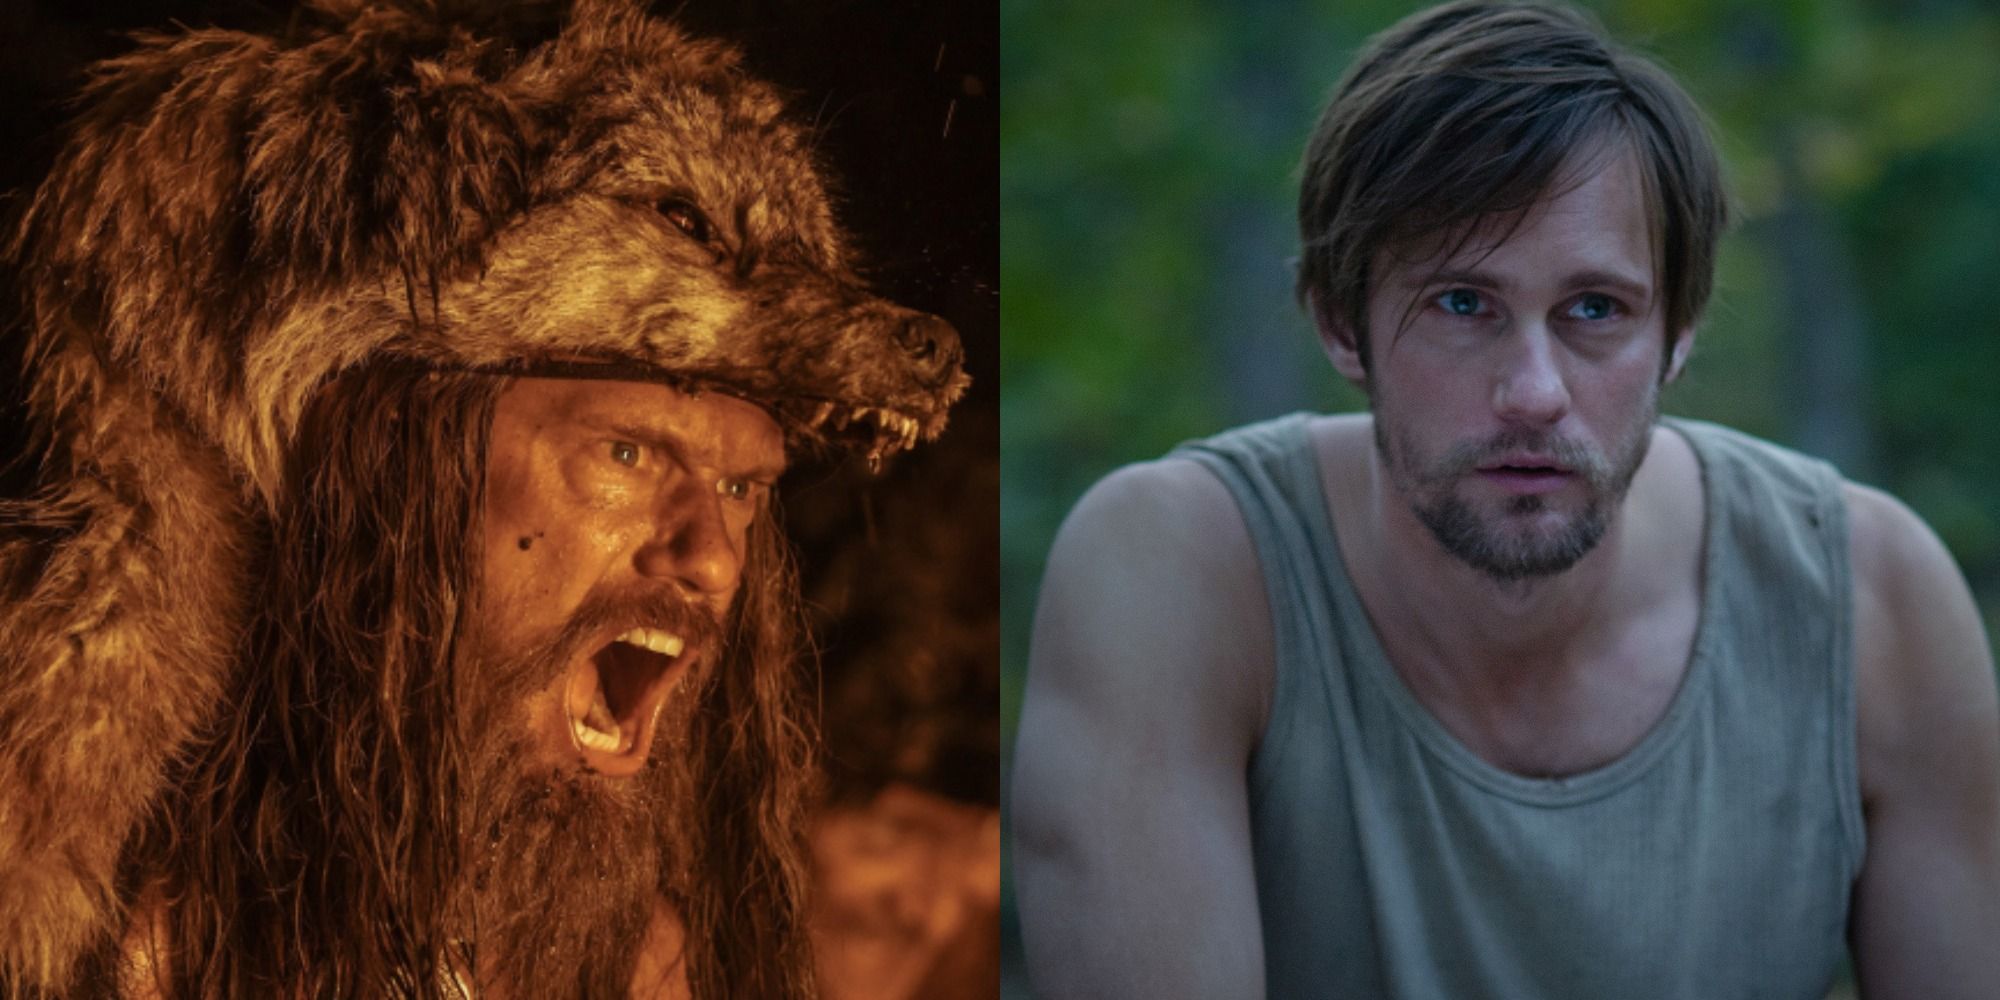 Split image showing Alxander Skarsgard in The Northman and The East.